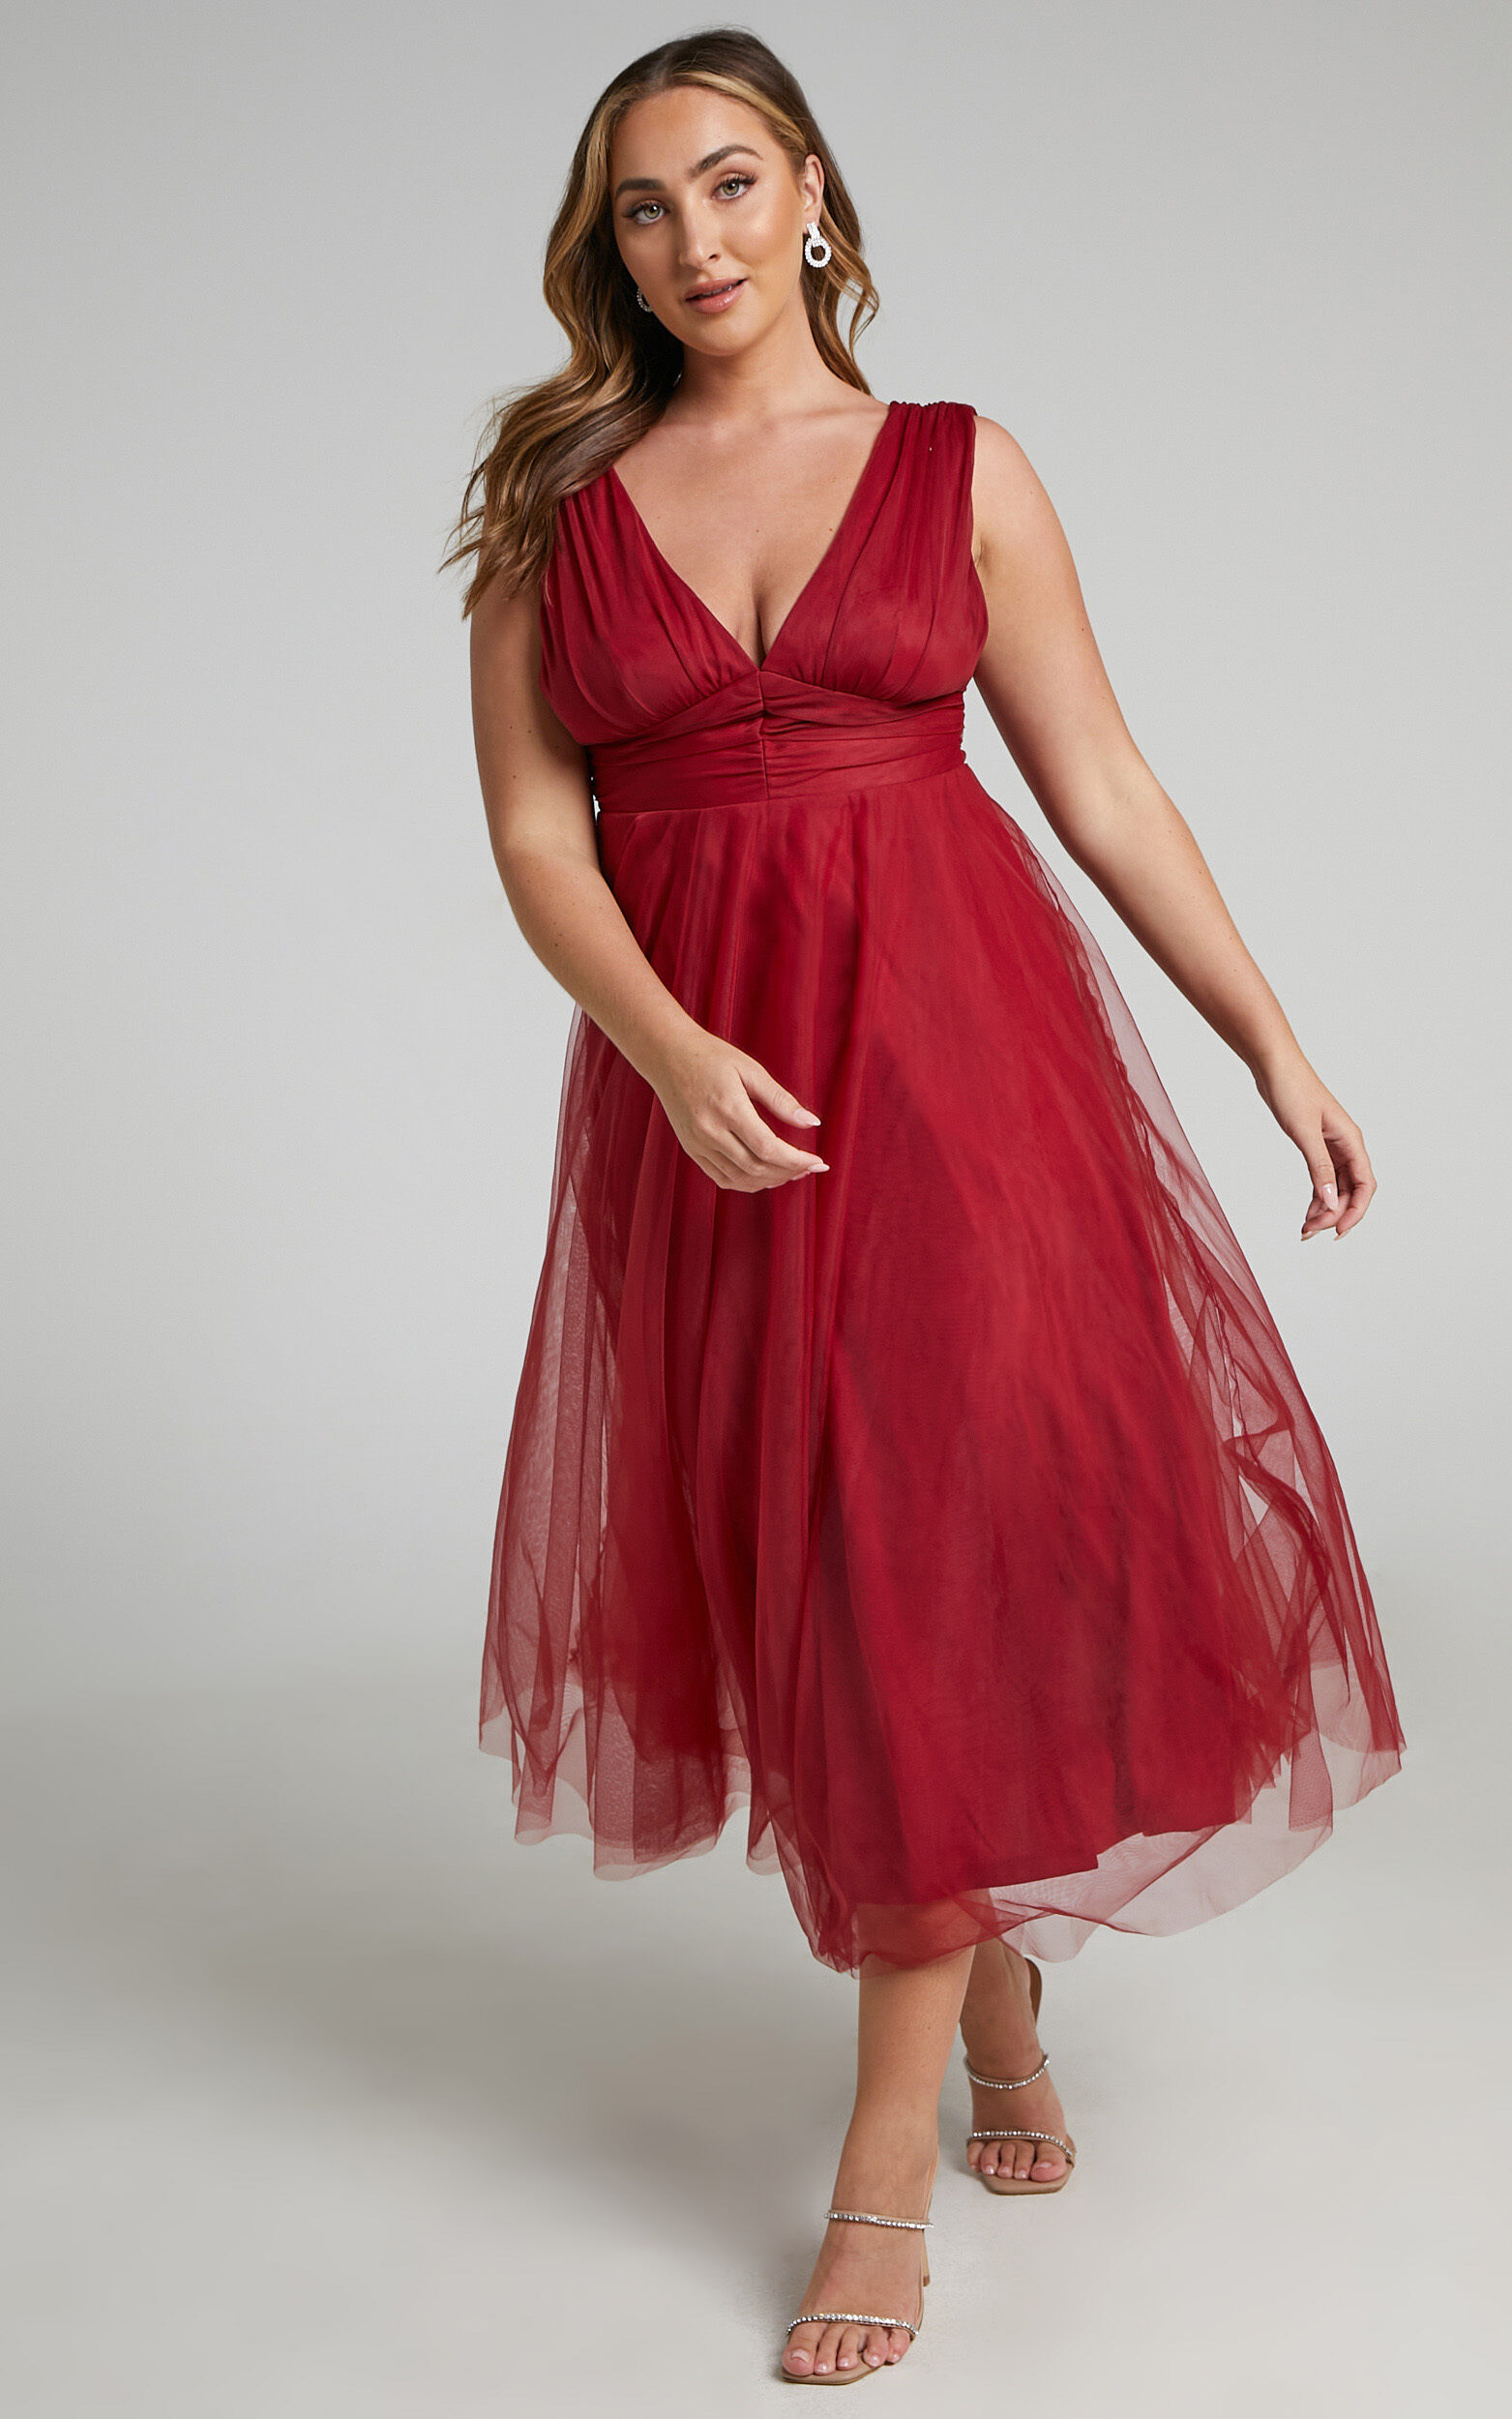 Agatha Sleeveless V-Neck Organza Midi Dress in Red - 06, RED2, super-hi-res image number null